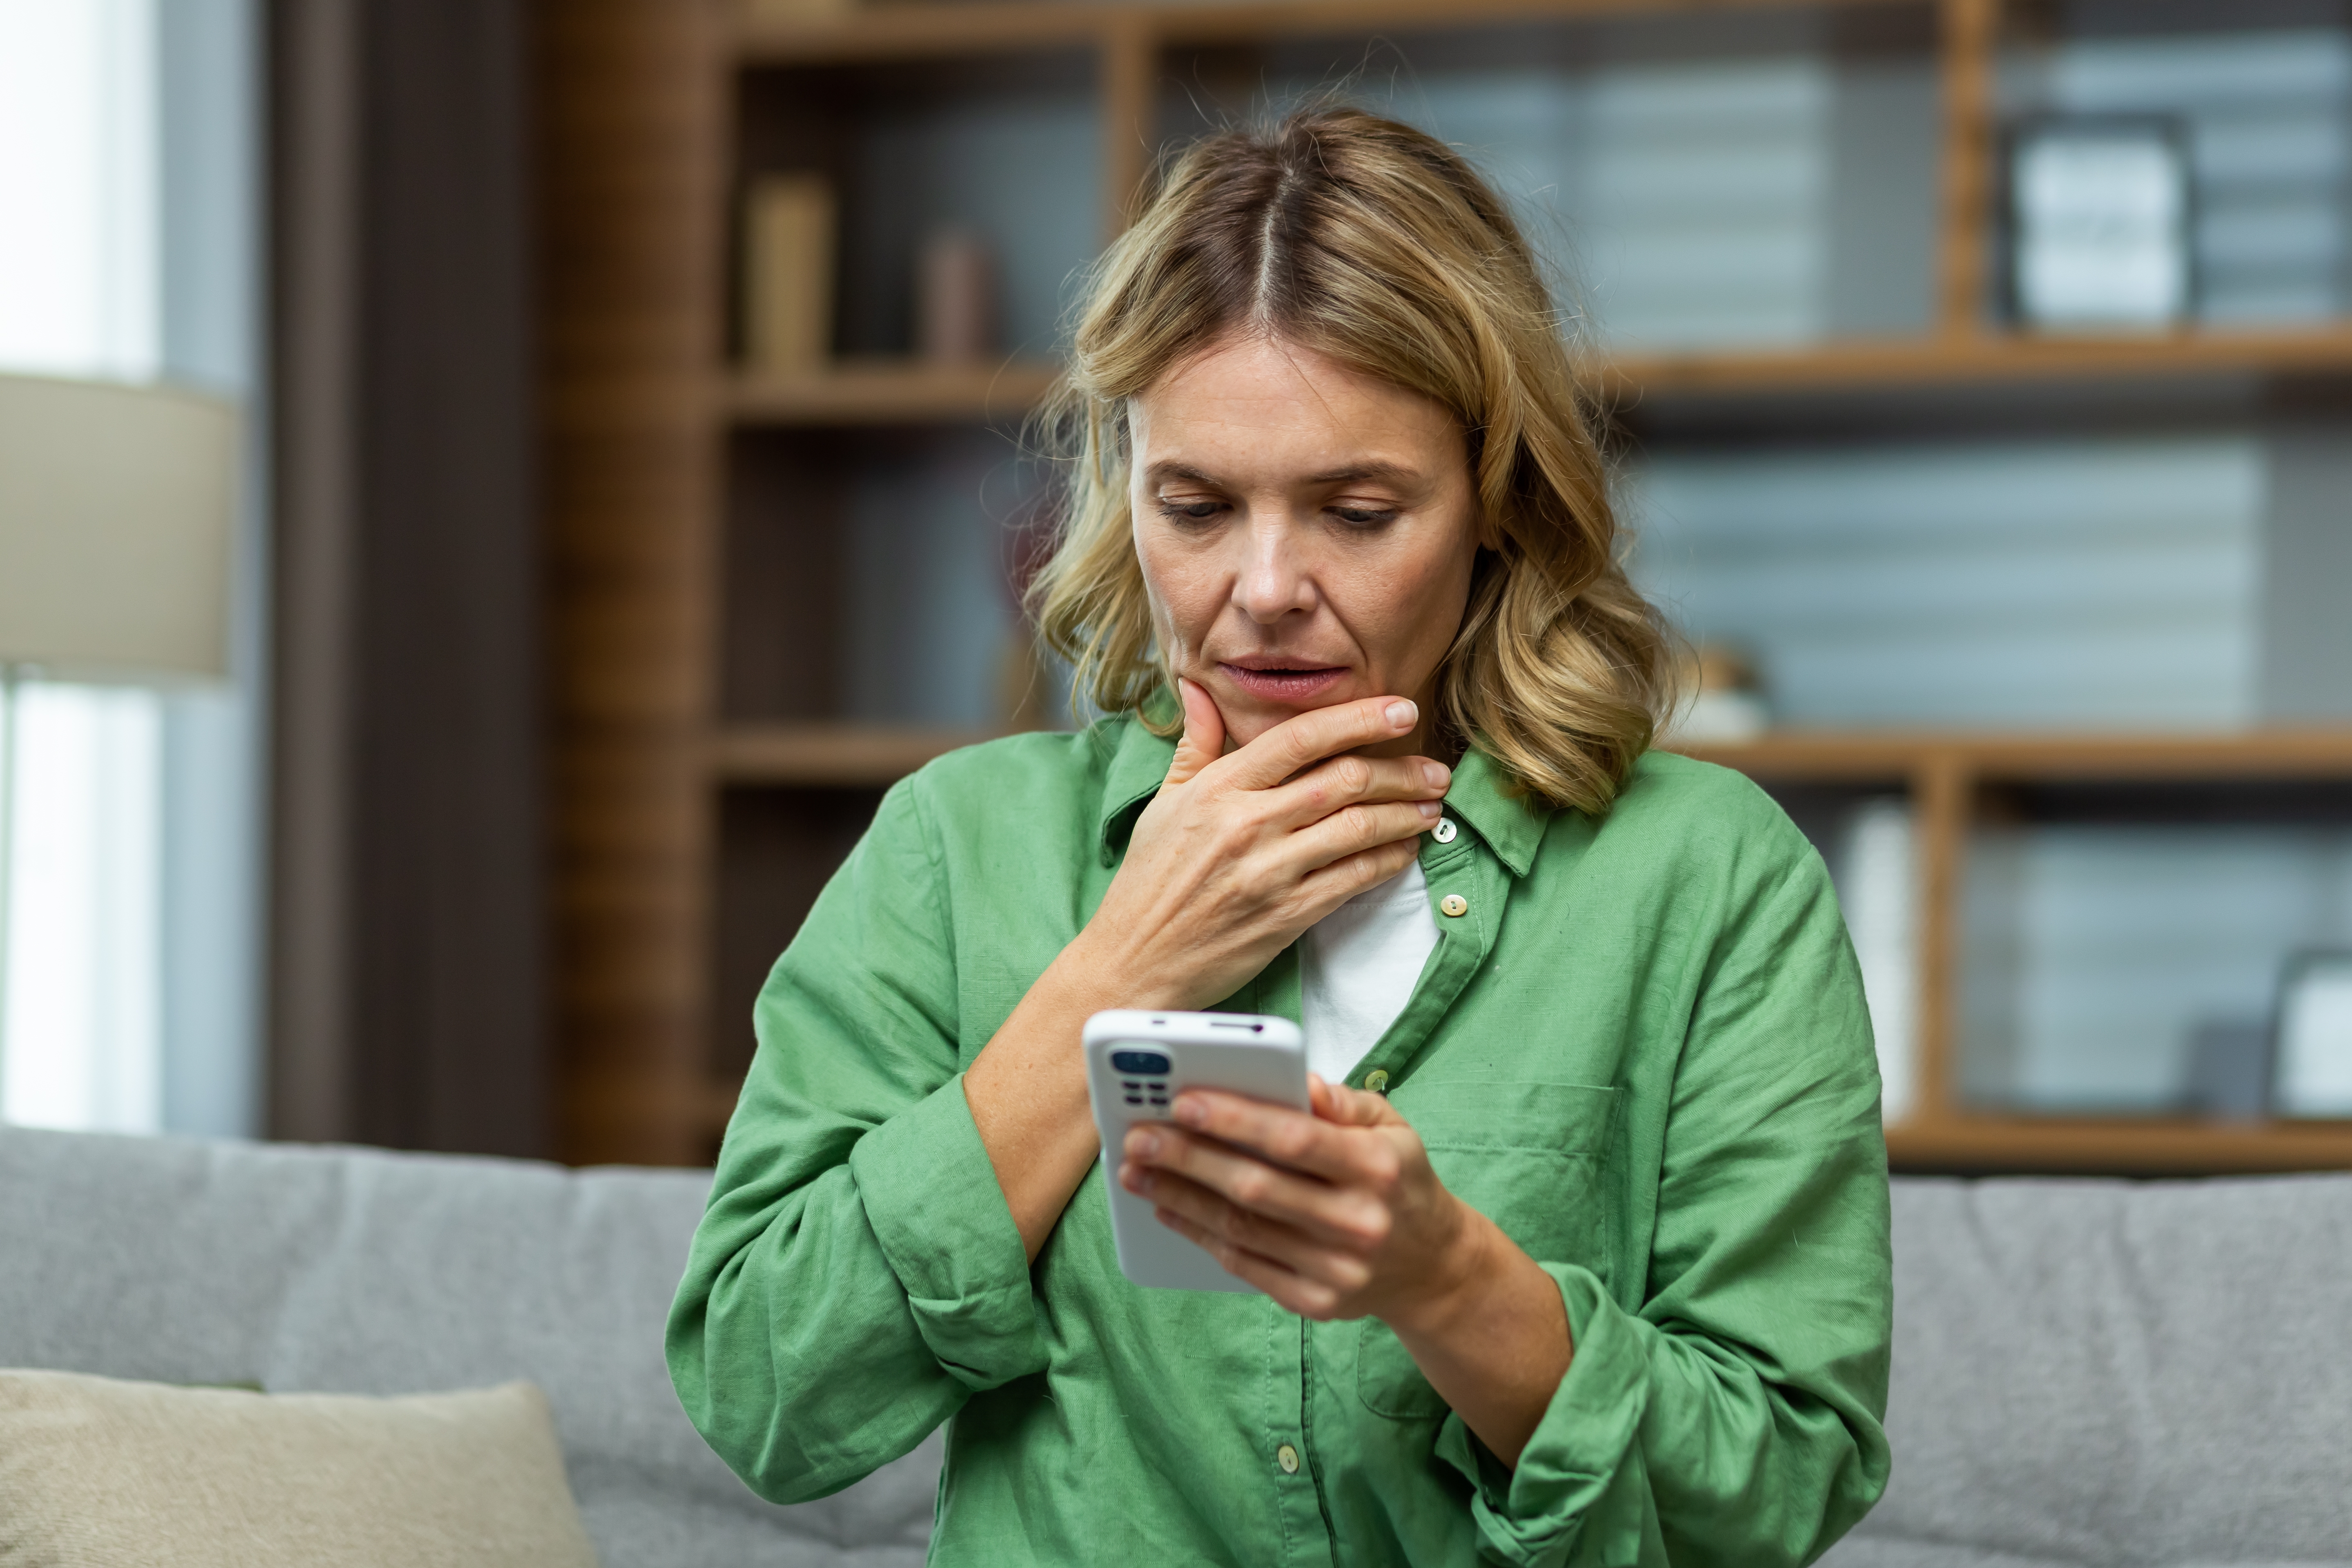 A middle-aged woman looking concerned while holding her phone | Source: Shutterstock